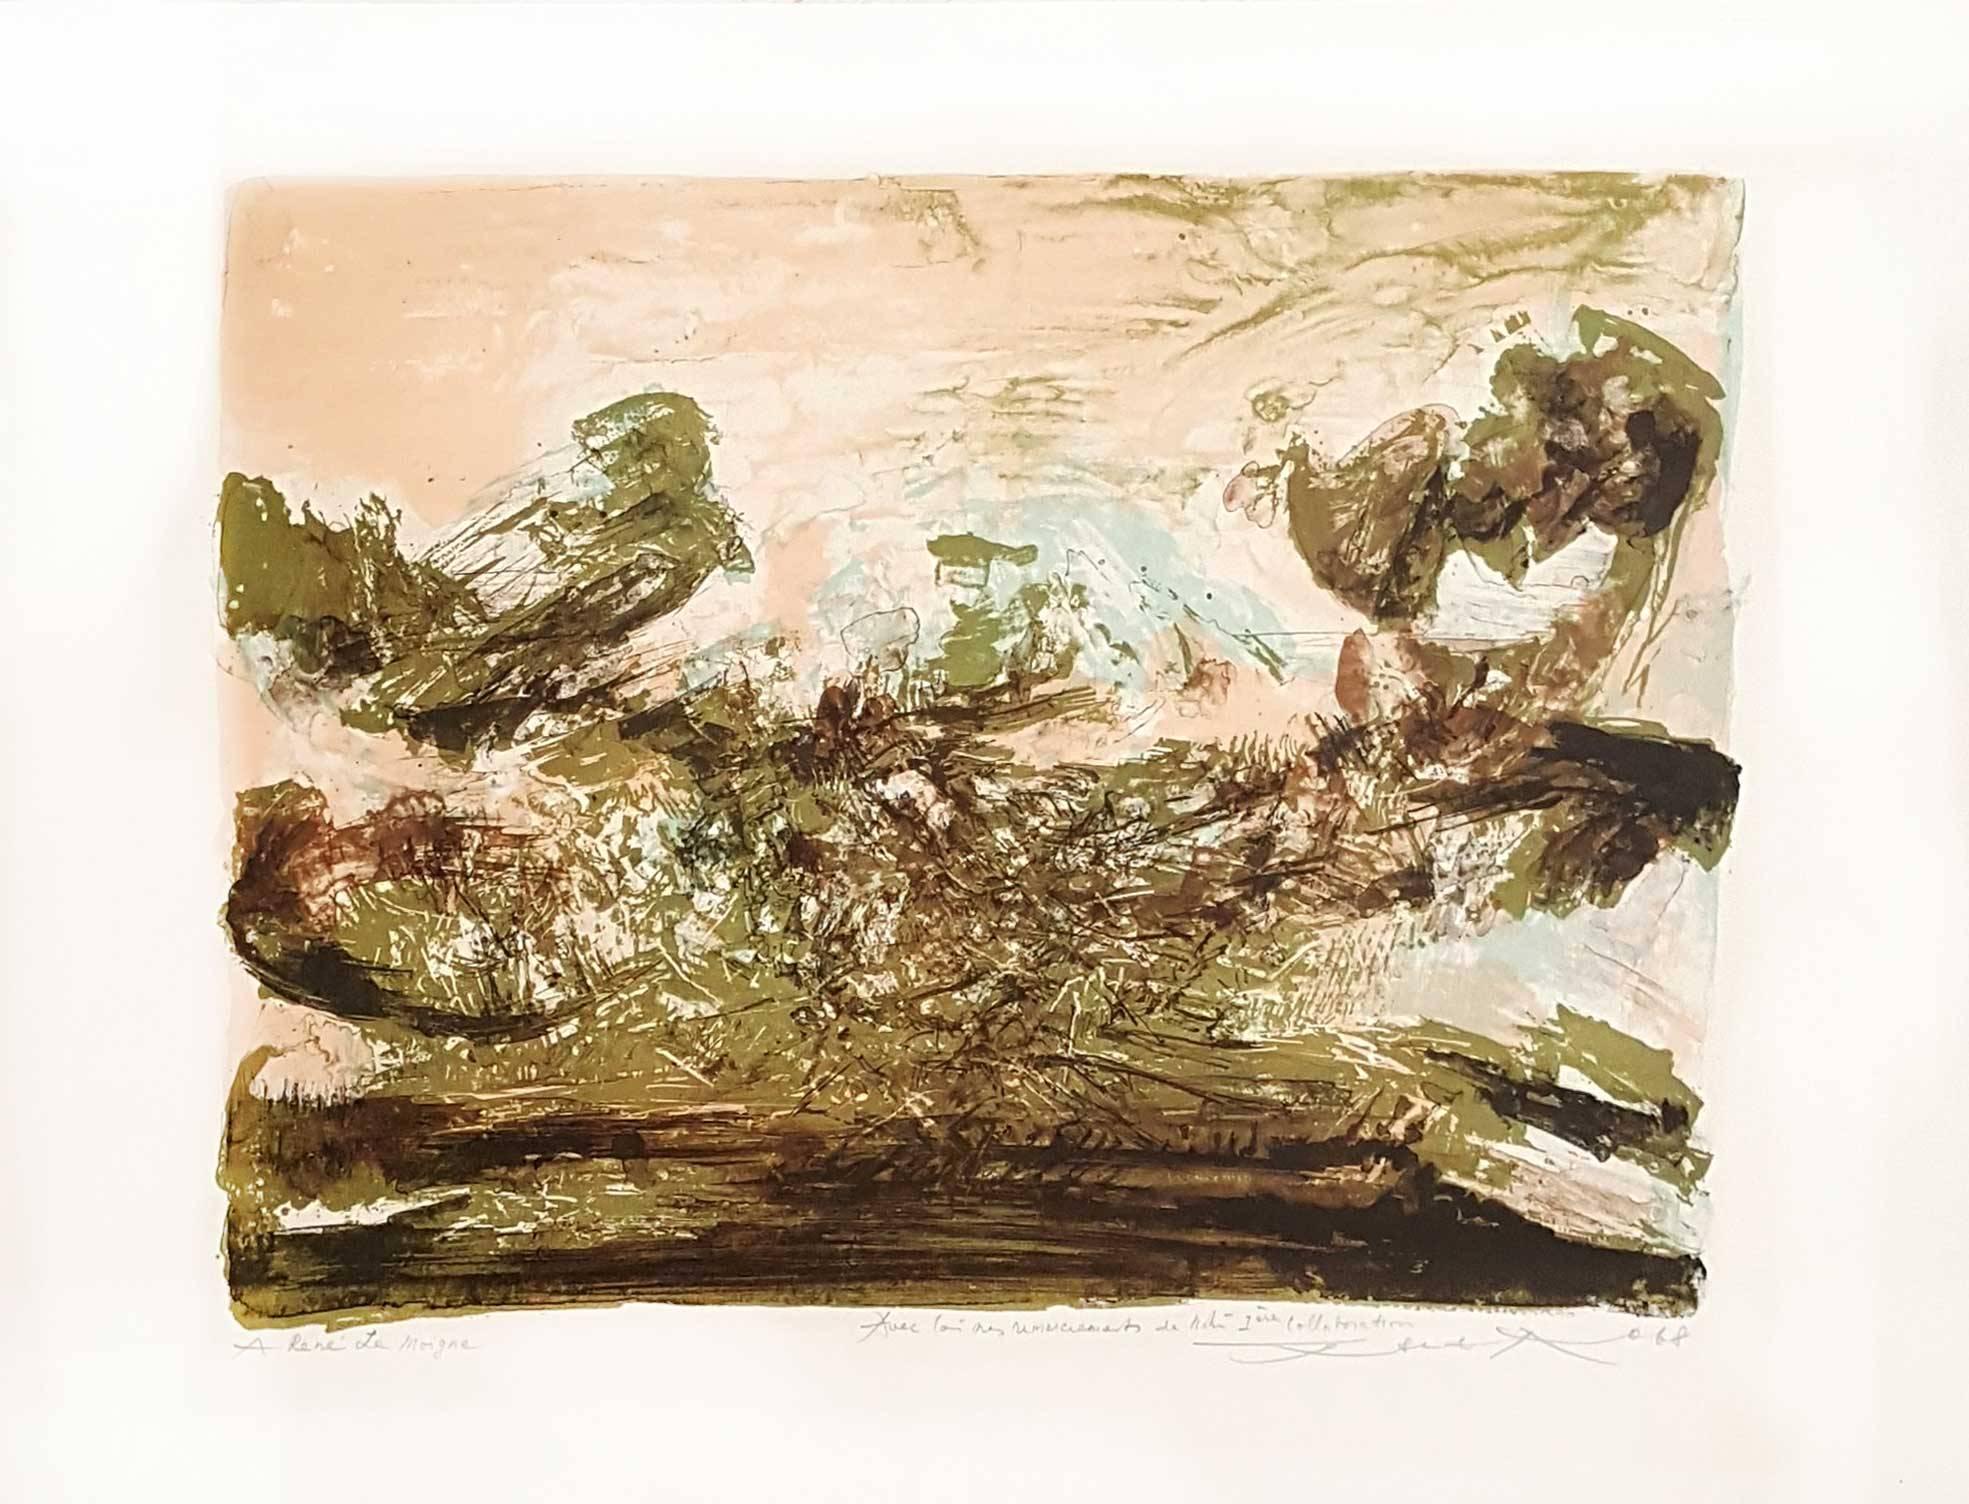 Zao Wou-Ki Abstract Print - Composition - Original Lithograph Handsigned - 120 copies